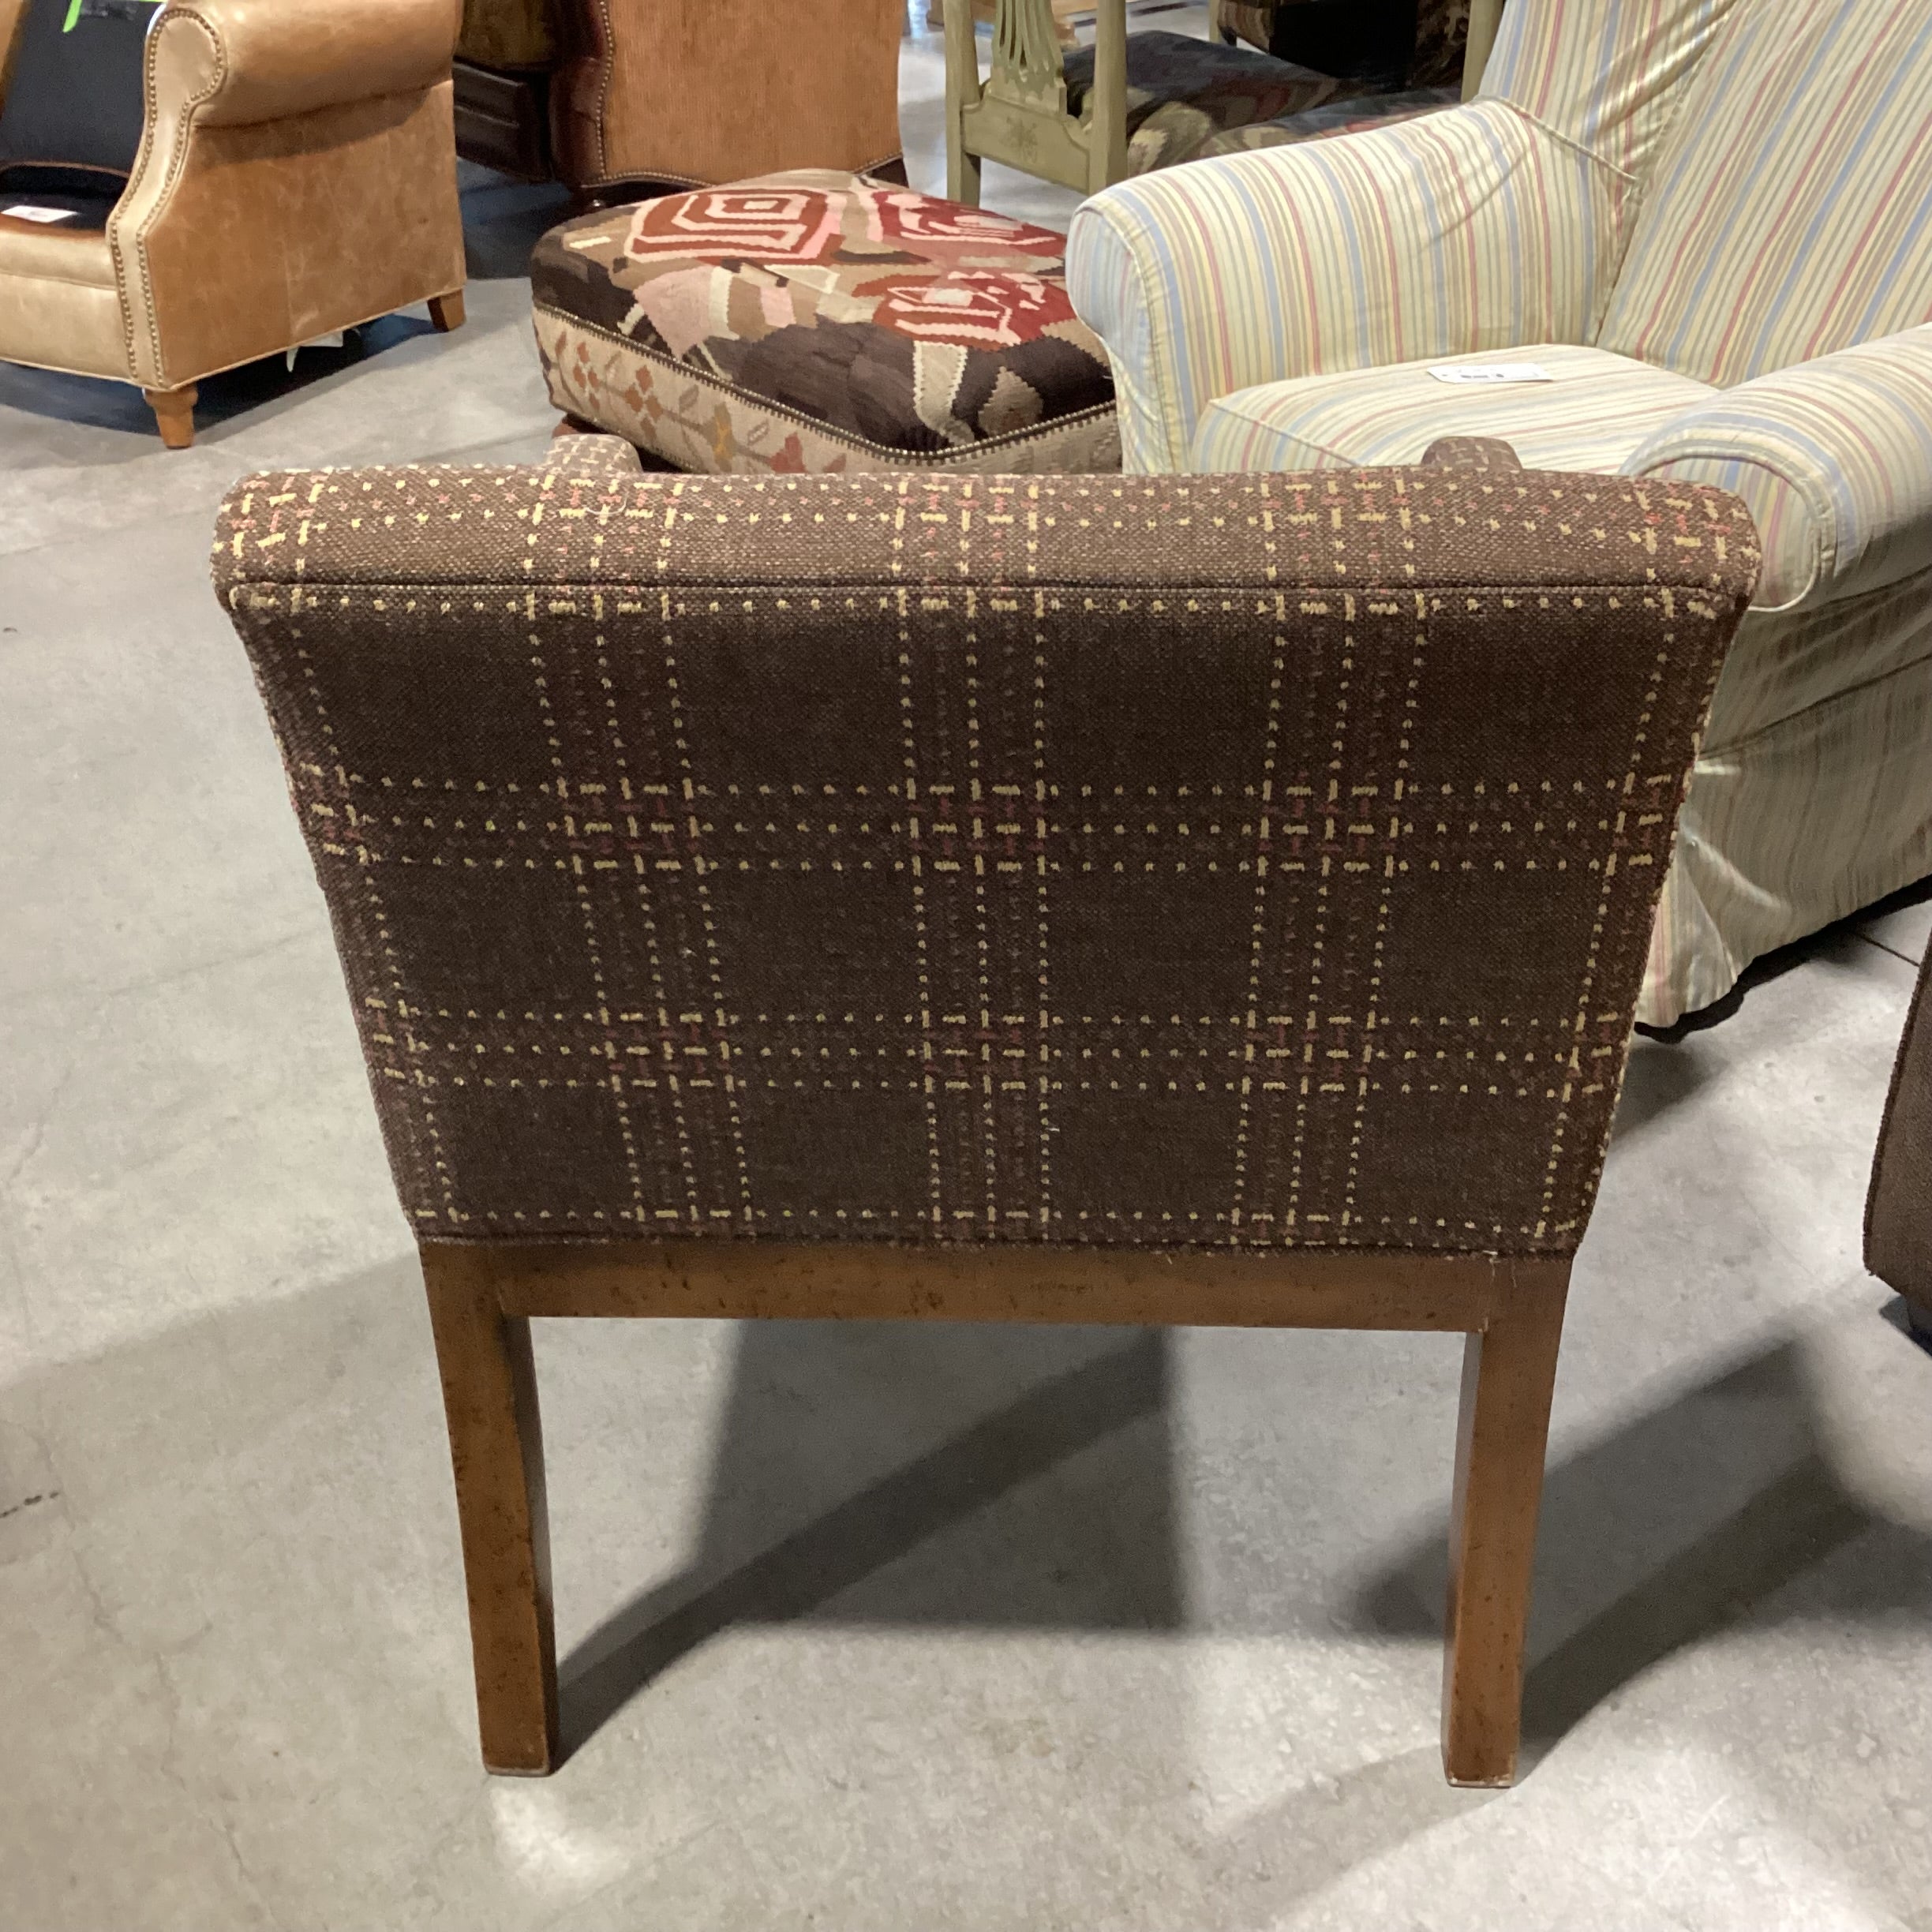 Brown Woven Plaid Leather Belt Accent Chair 28"x 25"x 35"